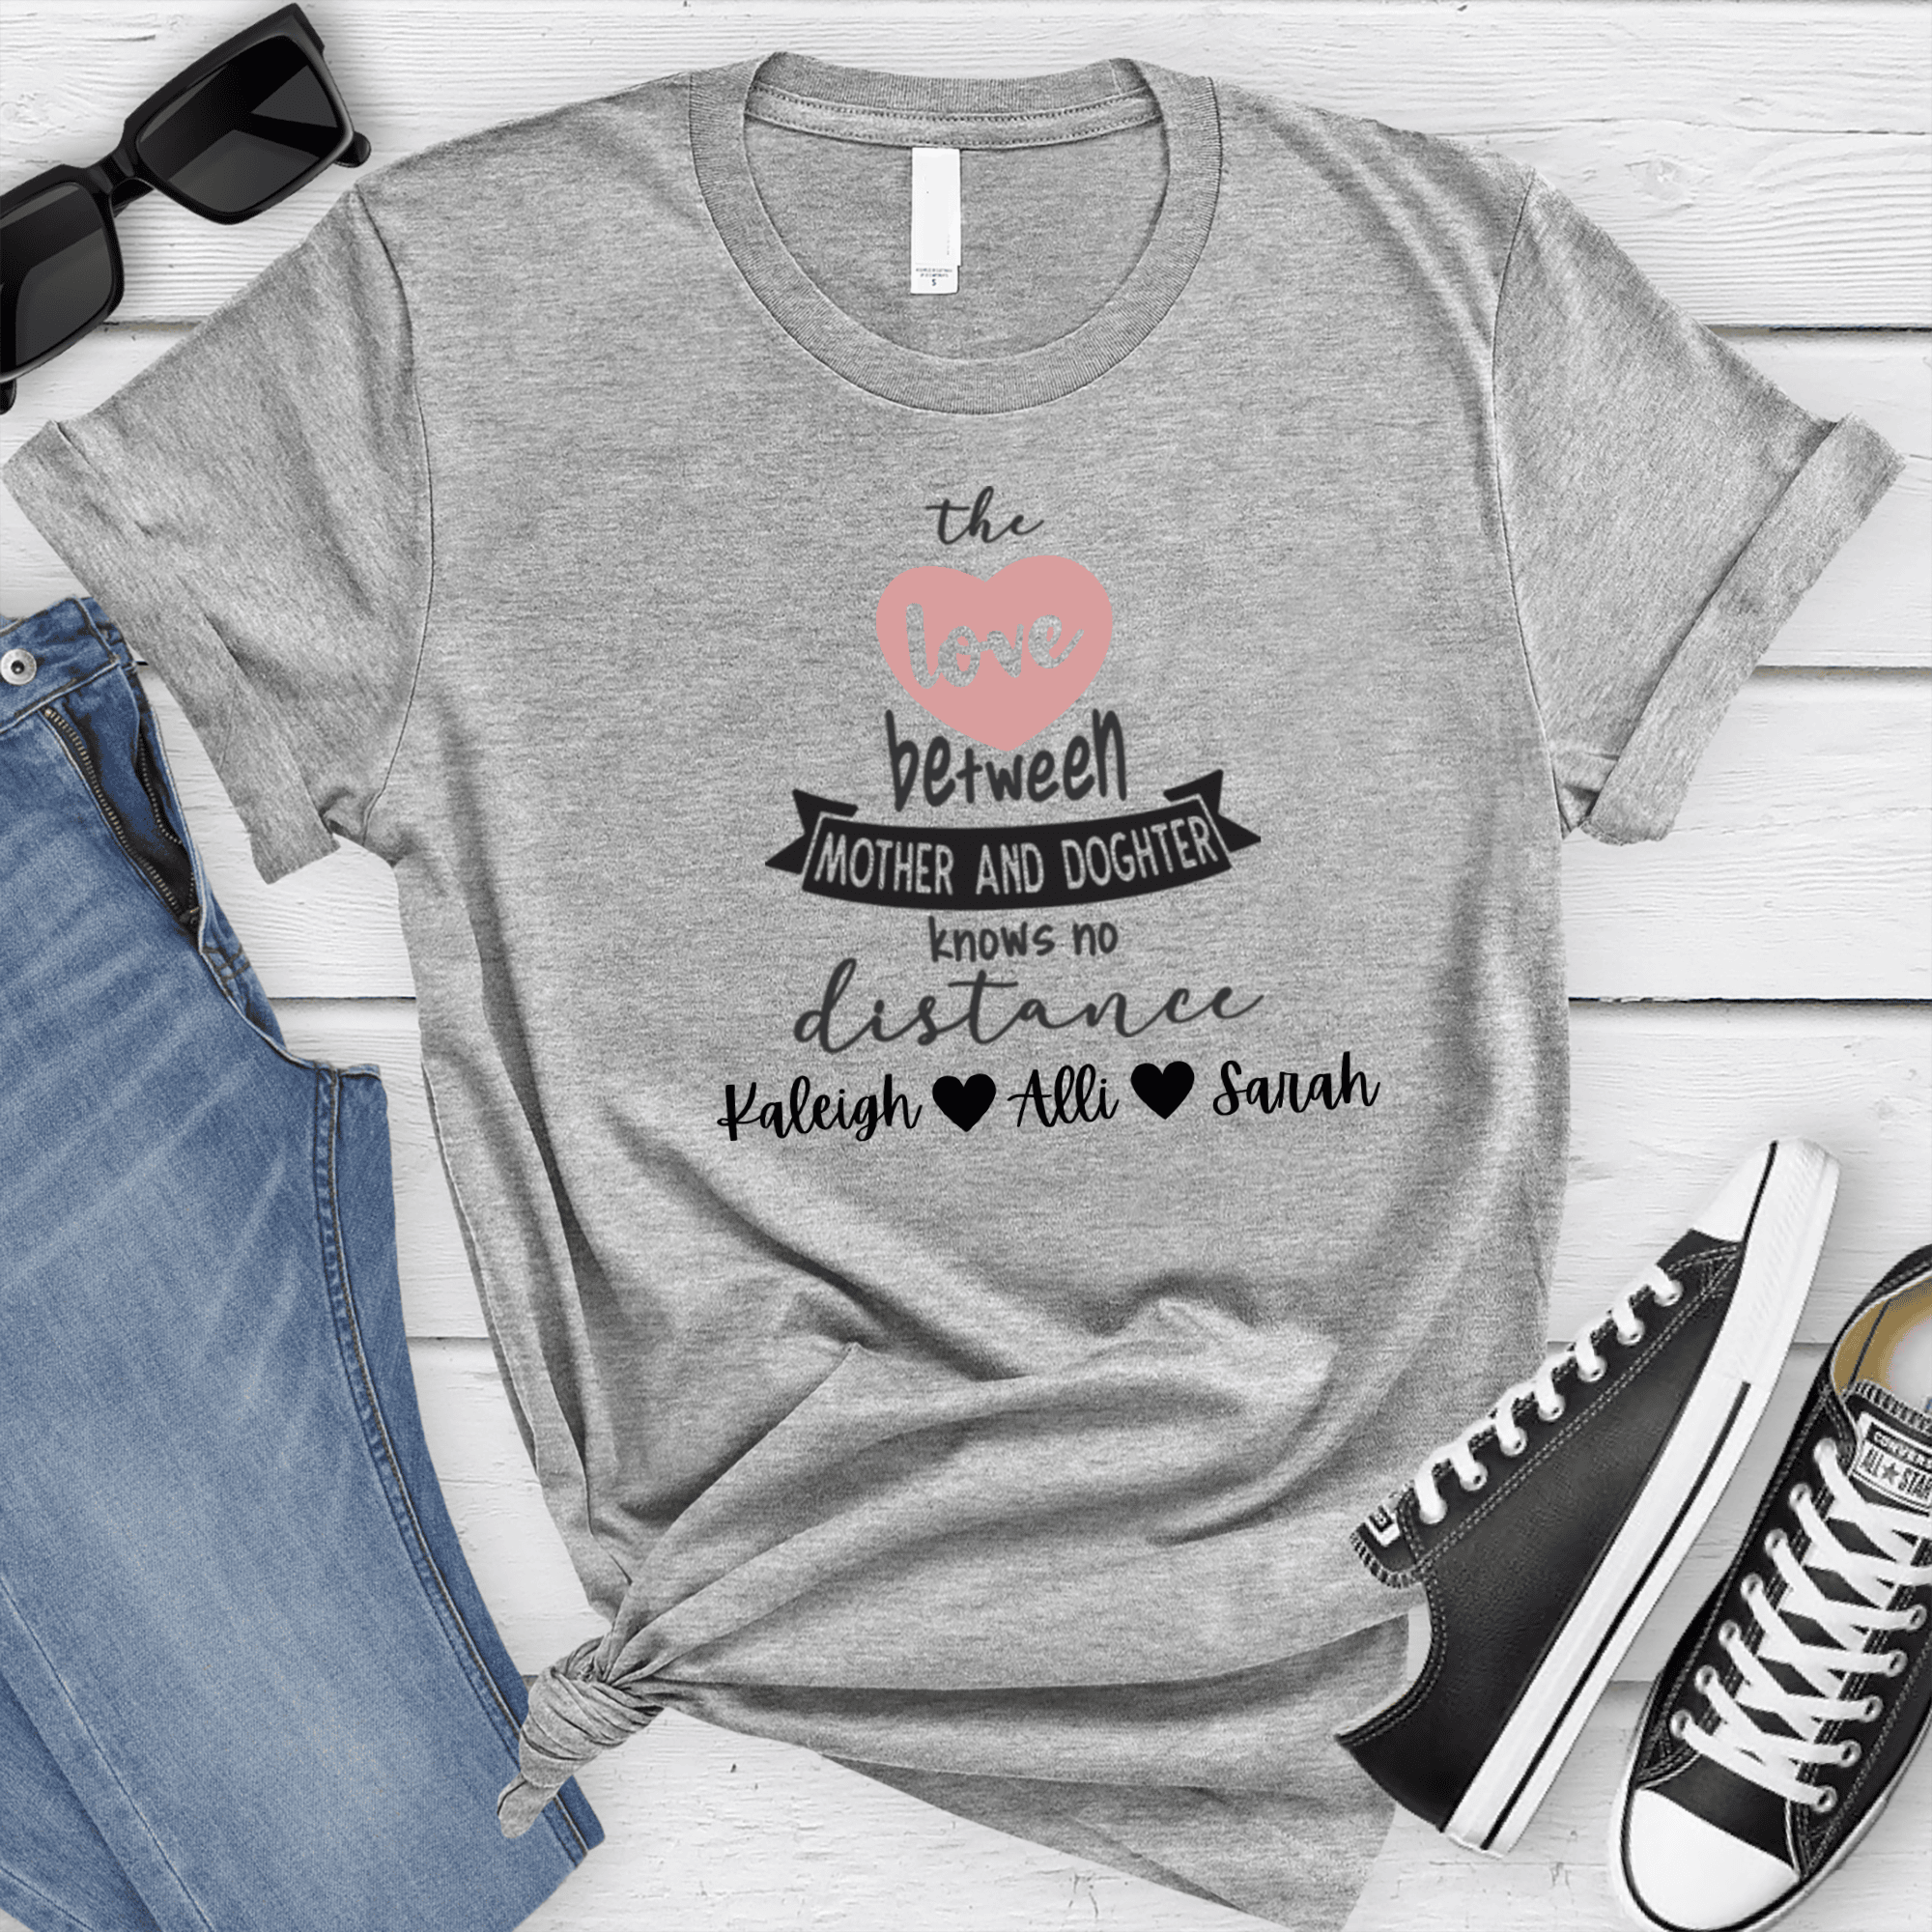 Womens Grey T Shirt with Mothers-And-Daughters design